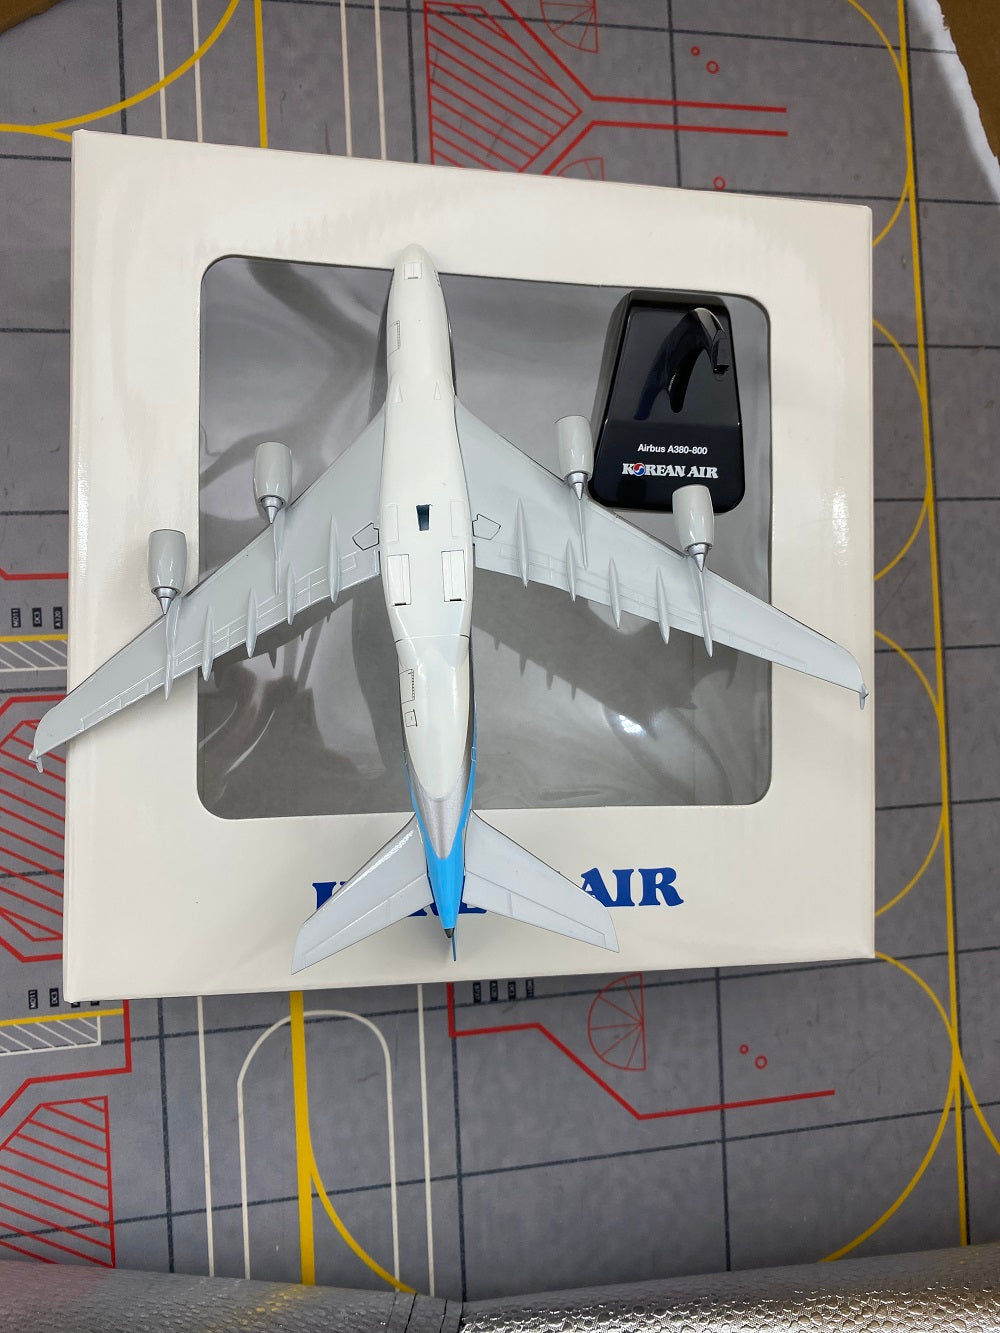 1:400 Hogan Wings Korean Air Airbus A380 Diecast Model With Stand